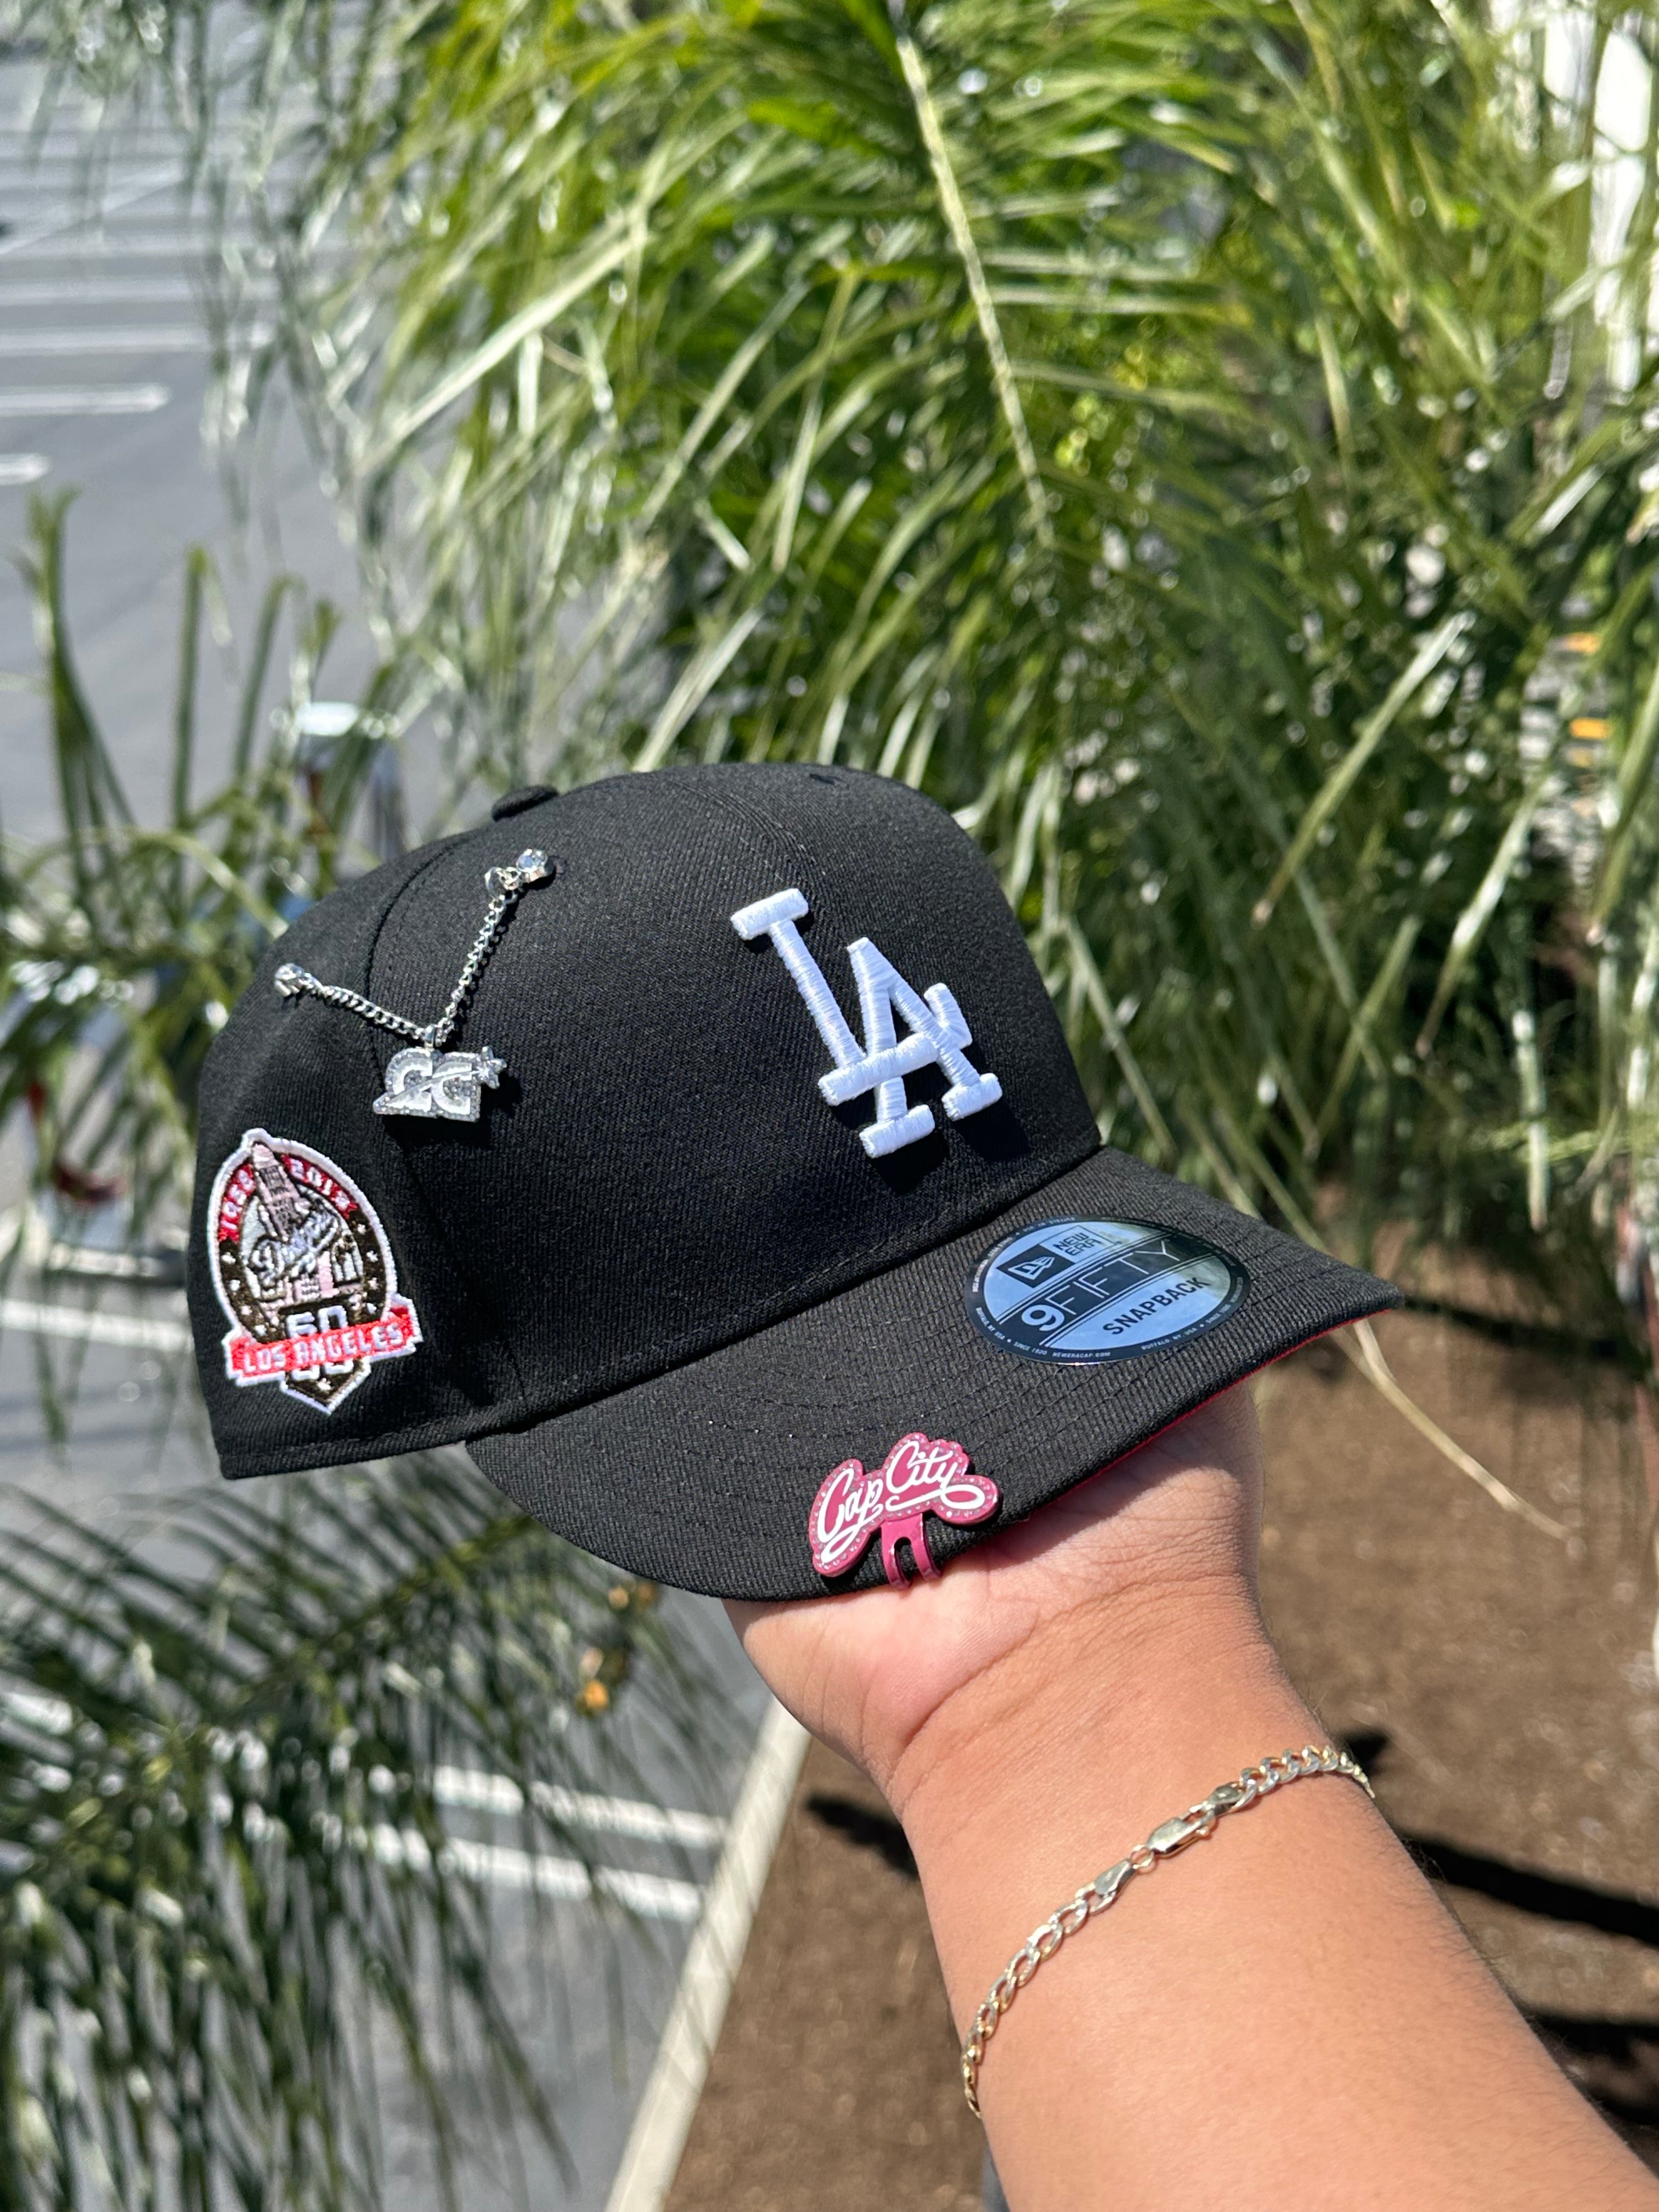 NEW ERA EXCLUSIVE 9FIFTY BLACK LOS ANGELES DODGERS SNAPBACK W/ 60TH ANNIVERSARY PATCH